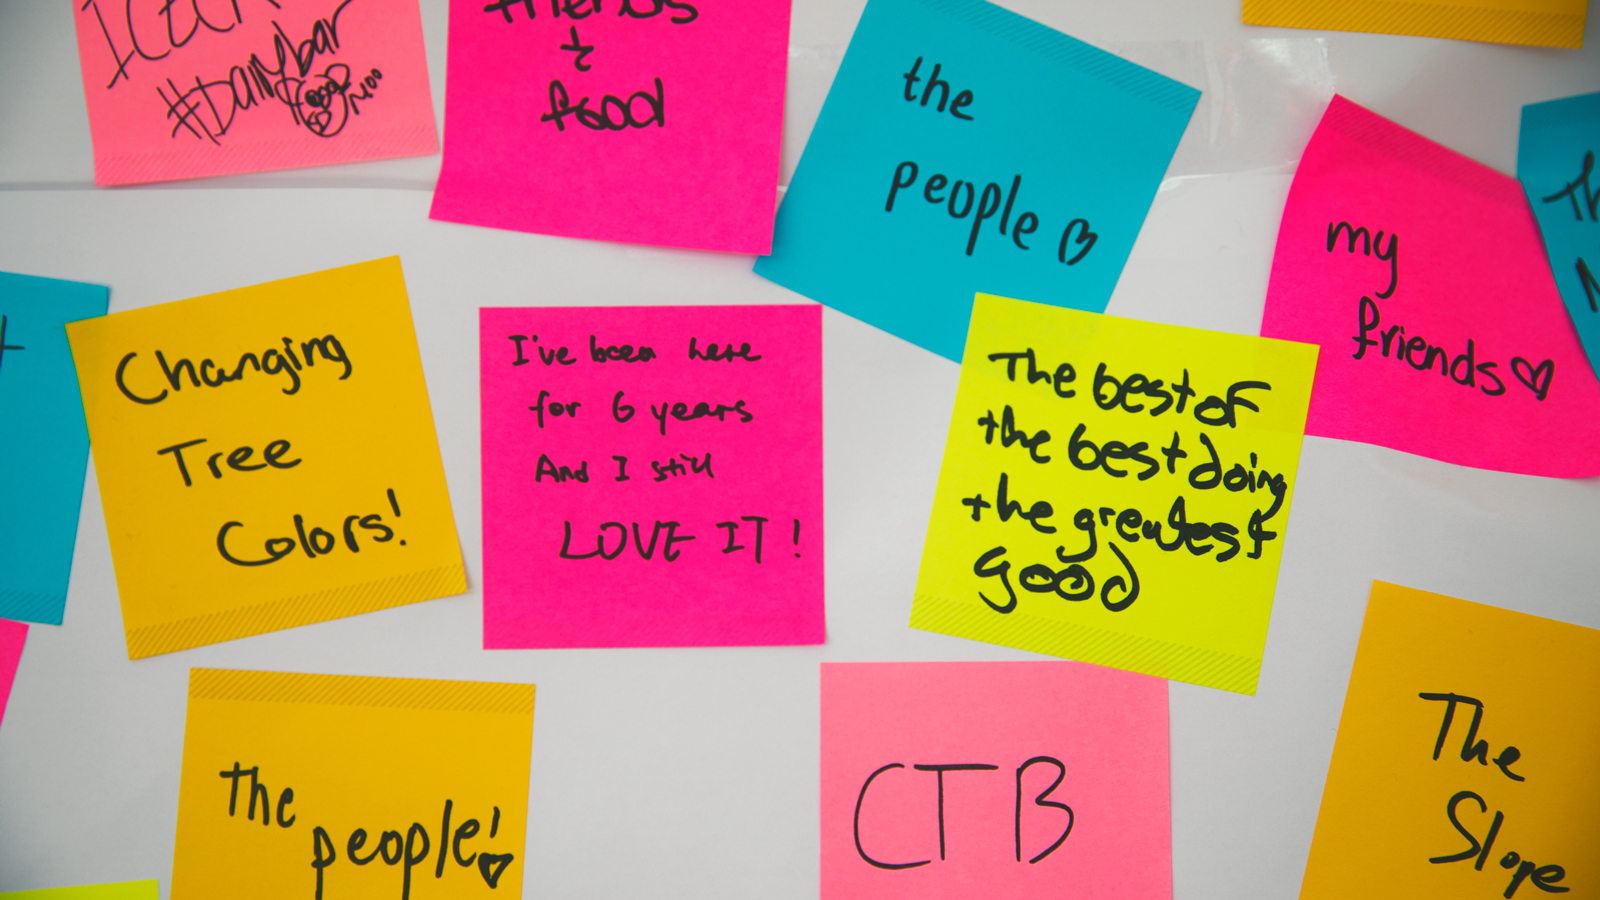 Image of multiple Post-It notes, some of which say: friends & food; the people; my friends; changing tree colors!; I've been here for 6 years and I still LOVE IT!; The best of the best doing the greatest good; the people!; CTB; and the slope.